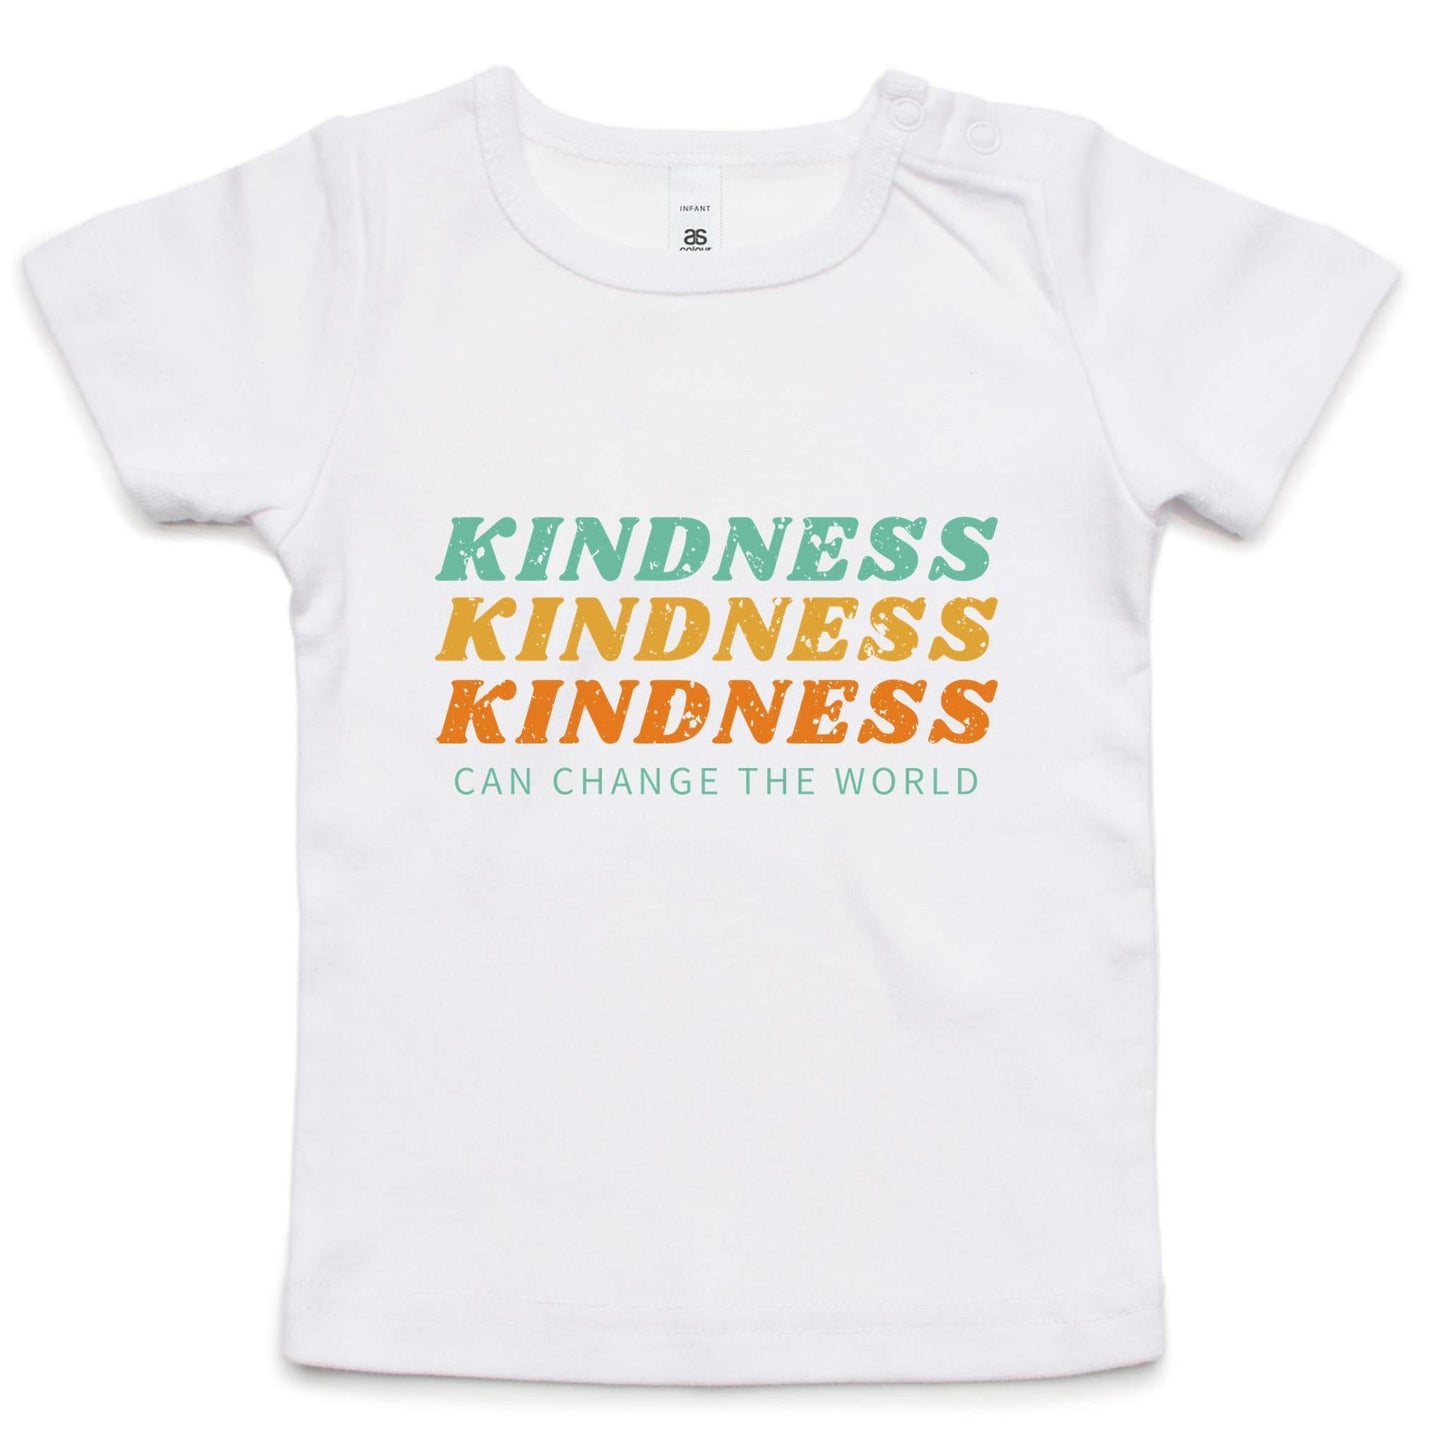 Kindness Can Change The World - Baby T-shirt White Baby T-shirt kids